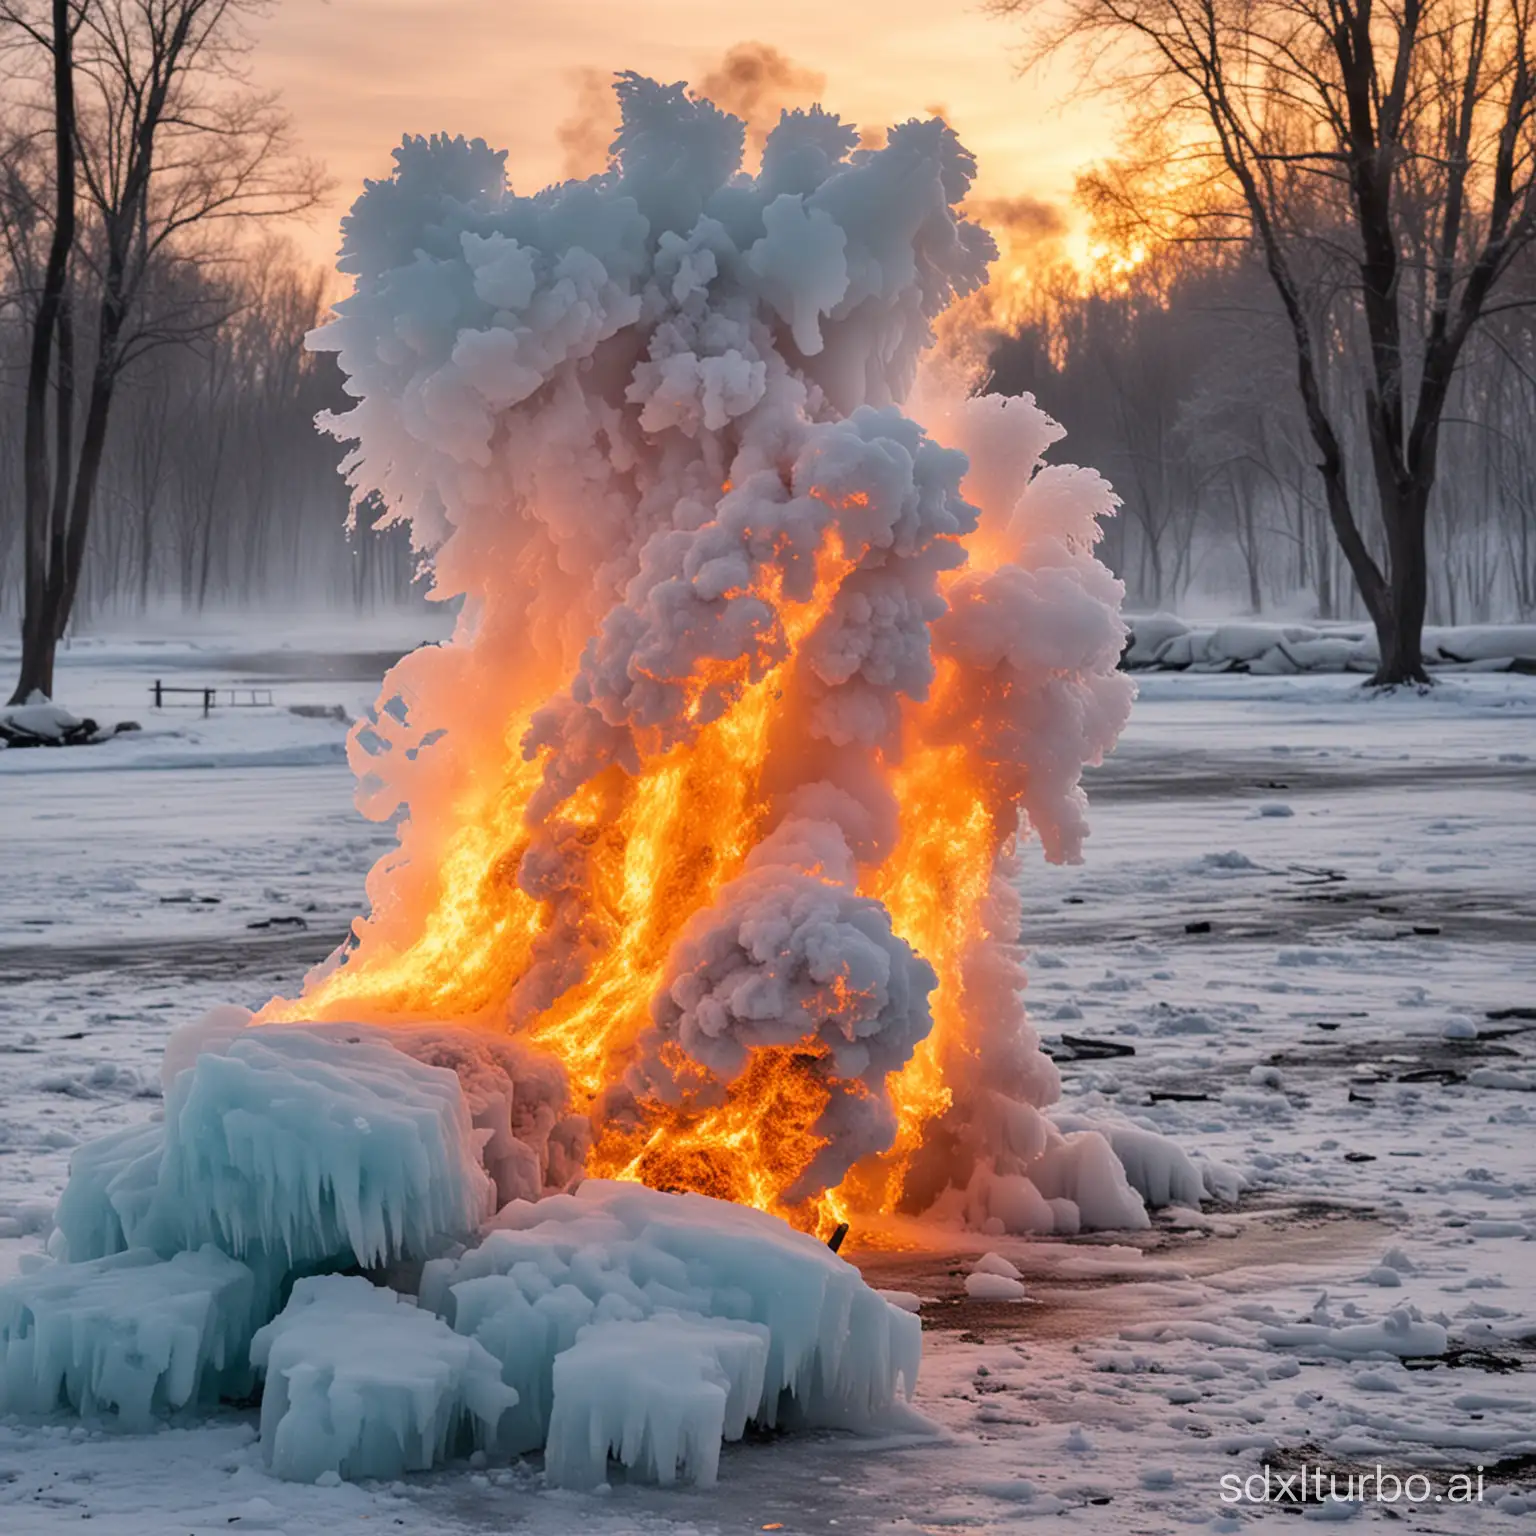 Ice-Overcoming-Fire-A-Clash-of-Elements-in-a-Frozen-Inferno